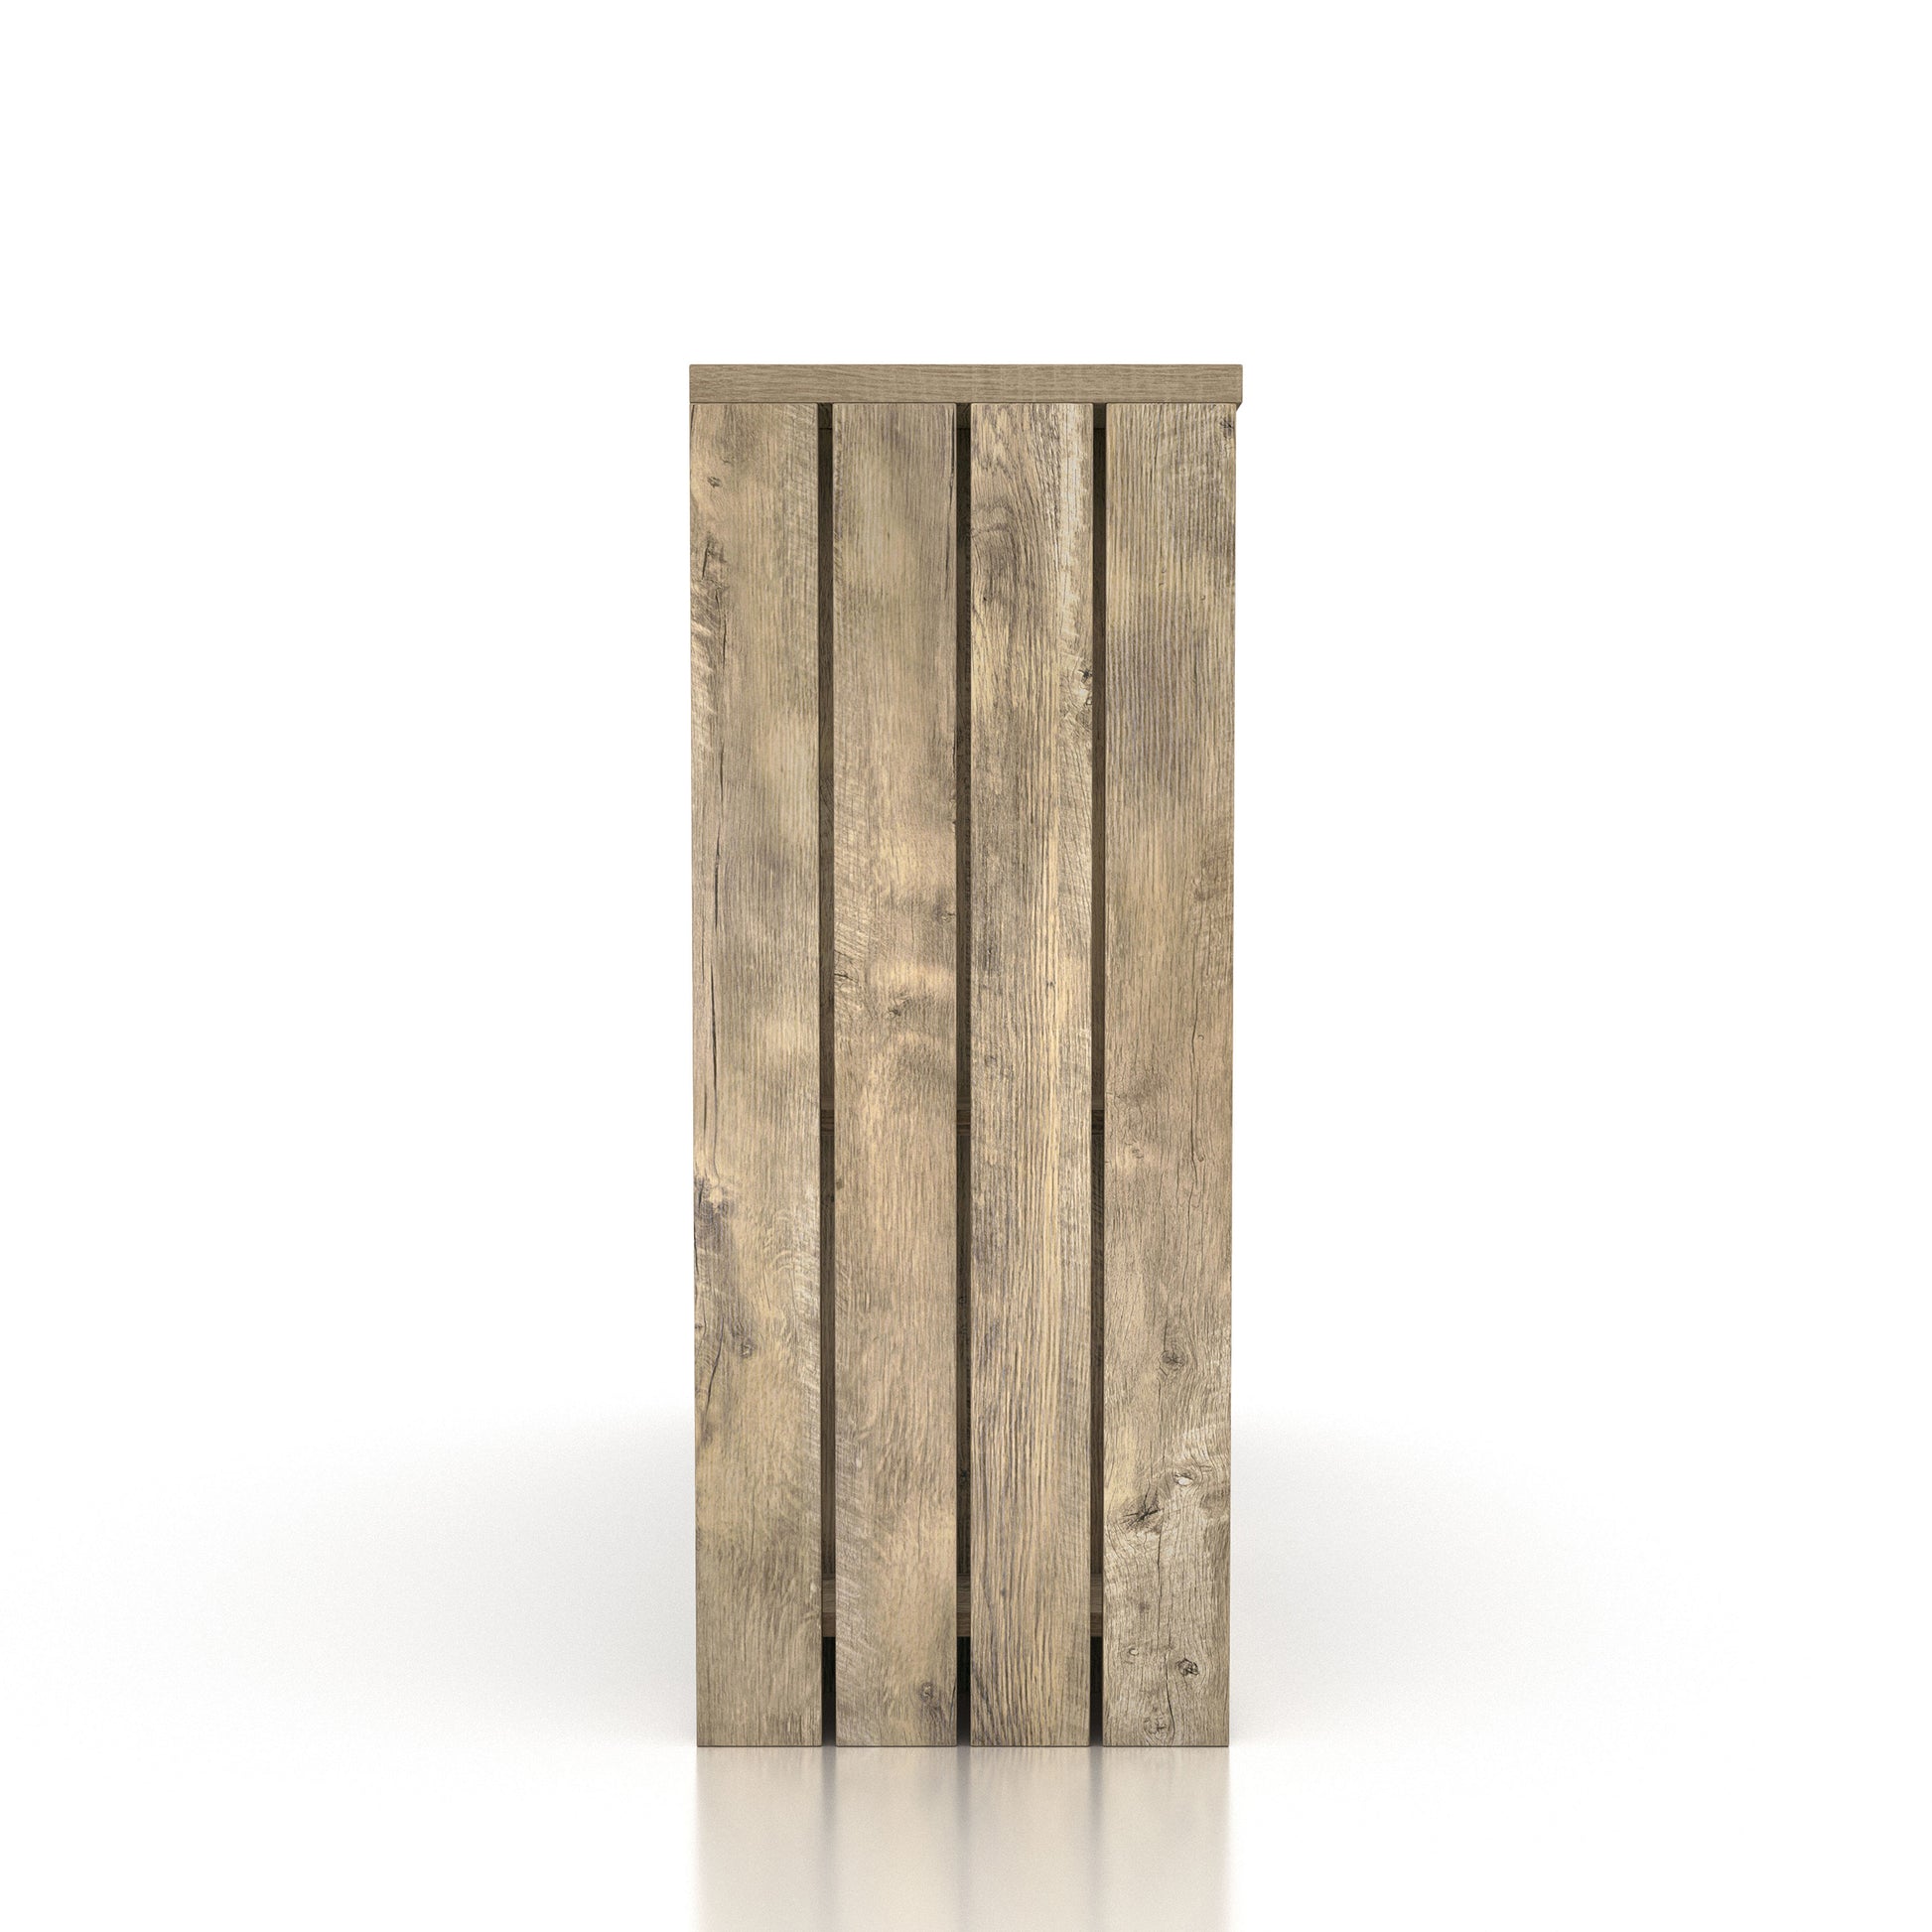 Front-facing side view of a rustic weathered oak nine-shelf home bar with chalkboard doors ion a white background